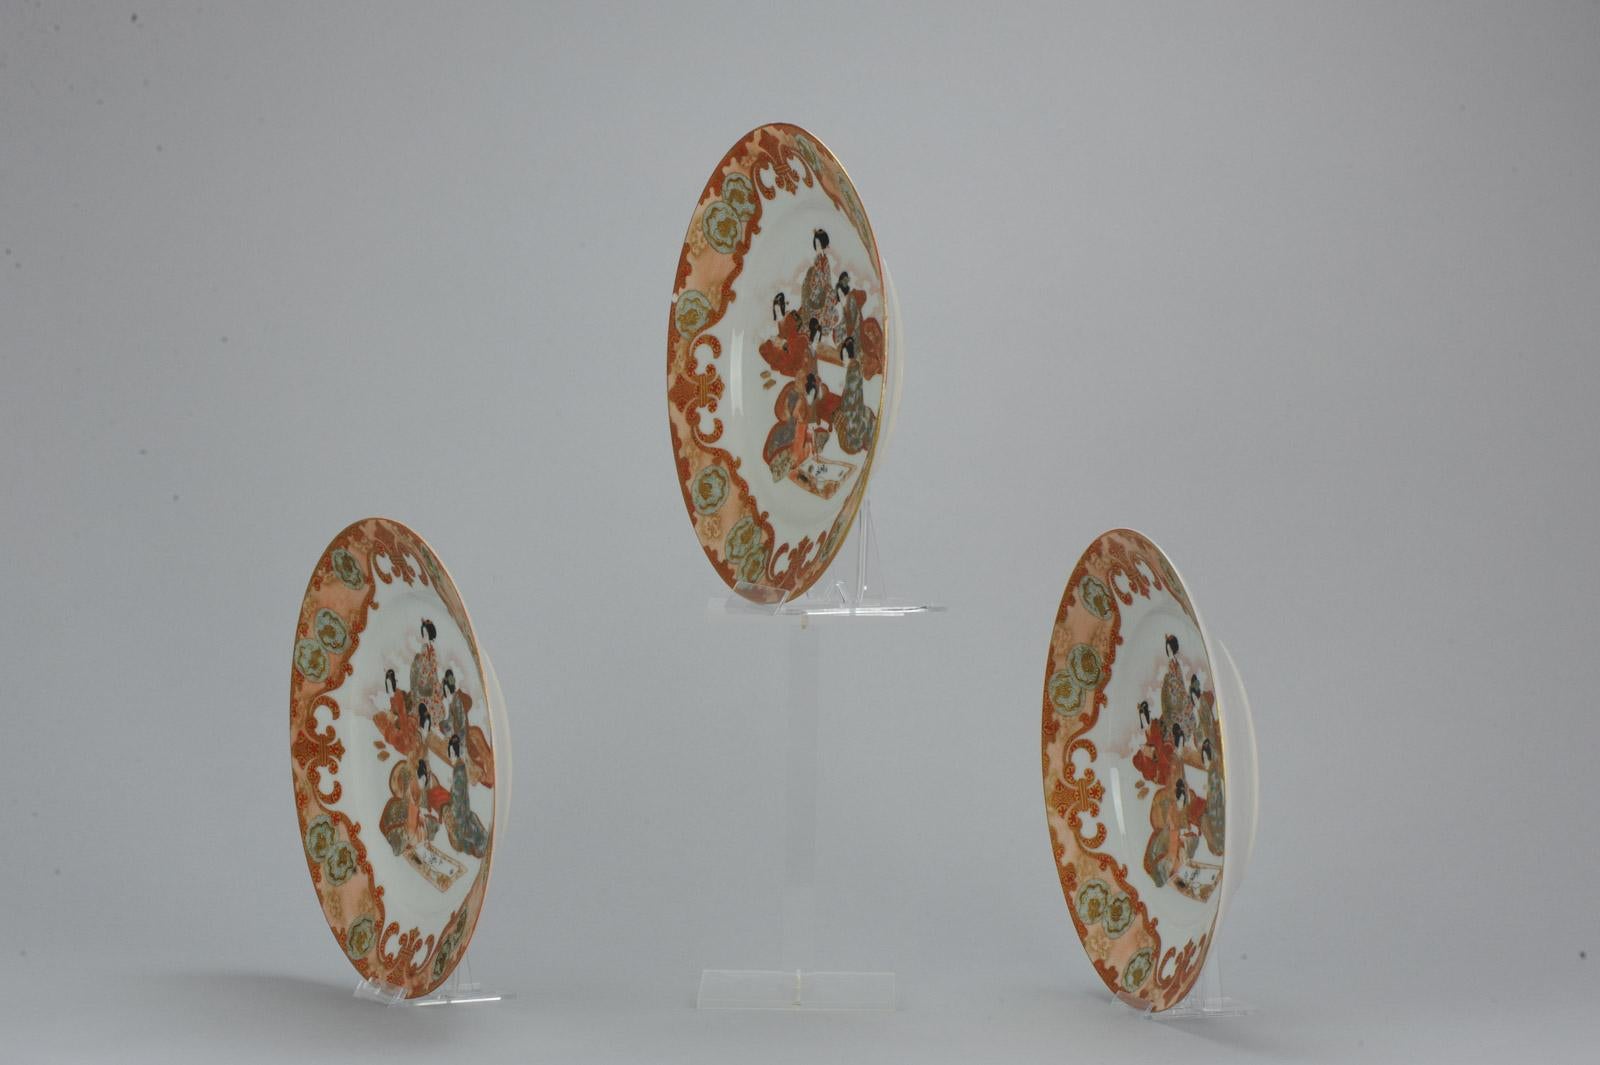 Nice Quality hand painted Kutani plates. Also marked at base.

Additional information:
Material: Porcelain & Pottery
Type: Plates
Region of Origin: Japan
Period: 19th century Meiji Periode (1867-1912)
Age: 19th century
Original/Reproduction: